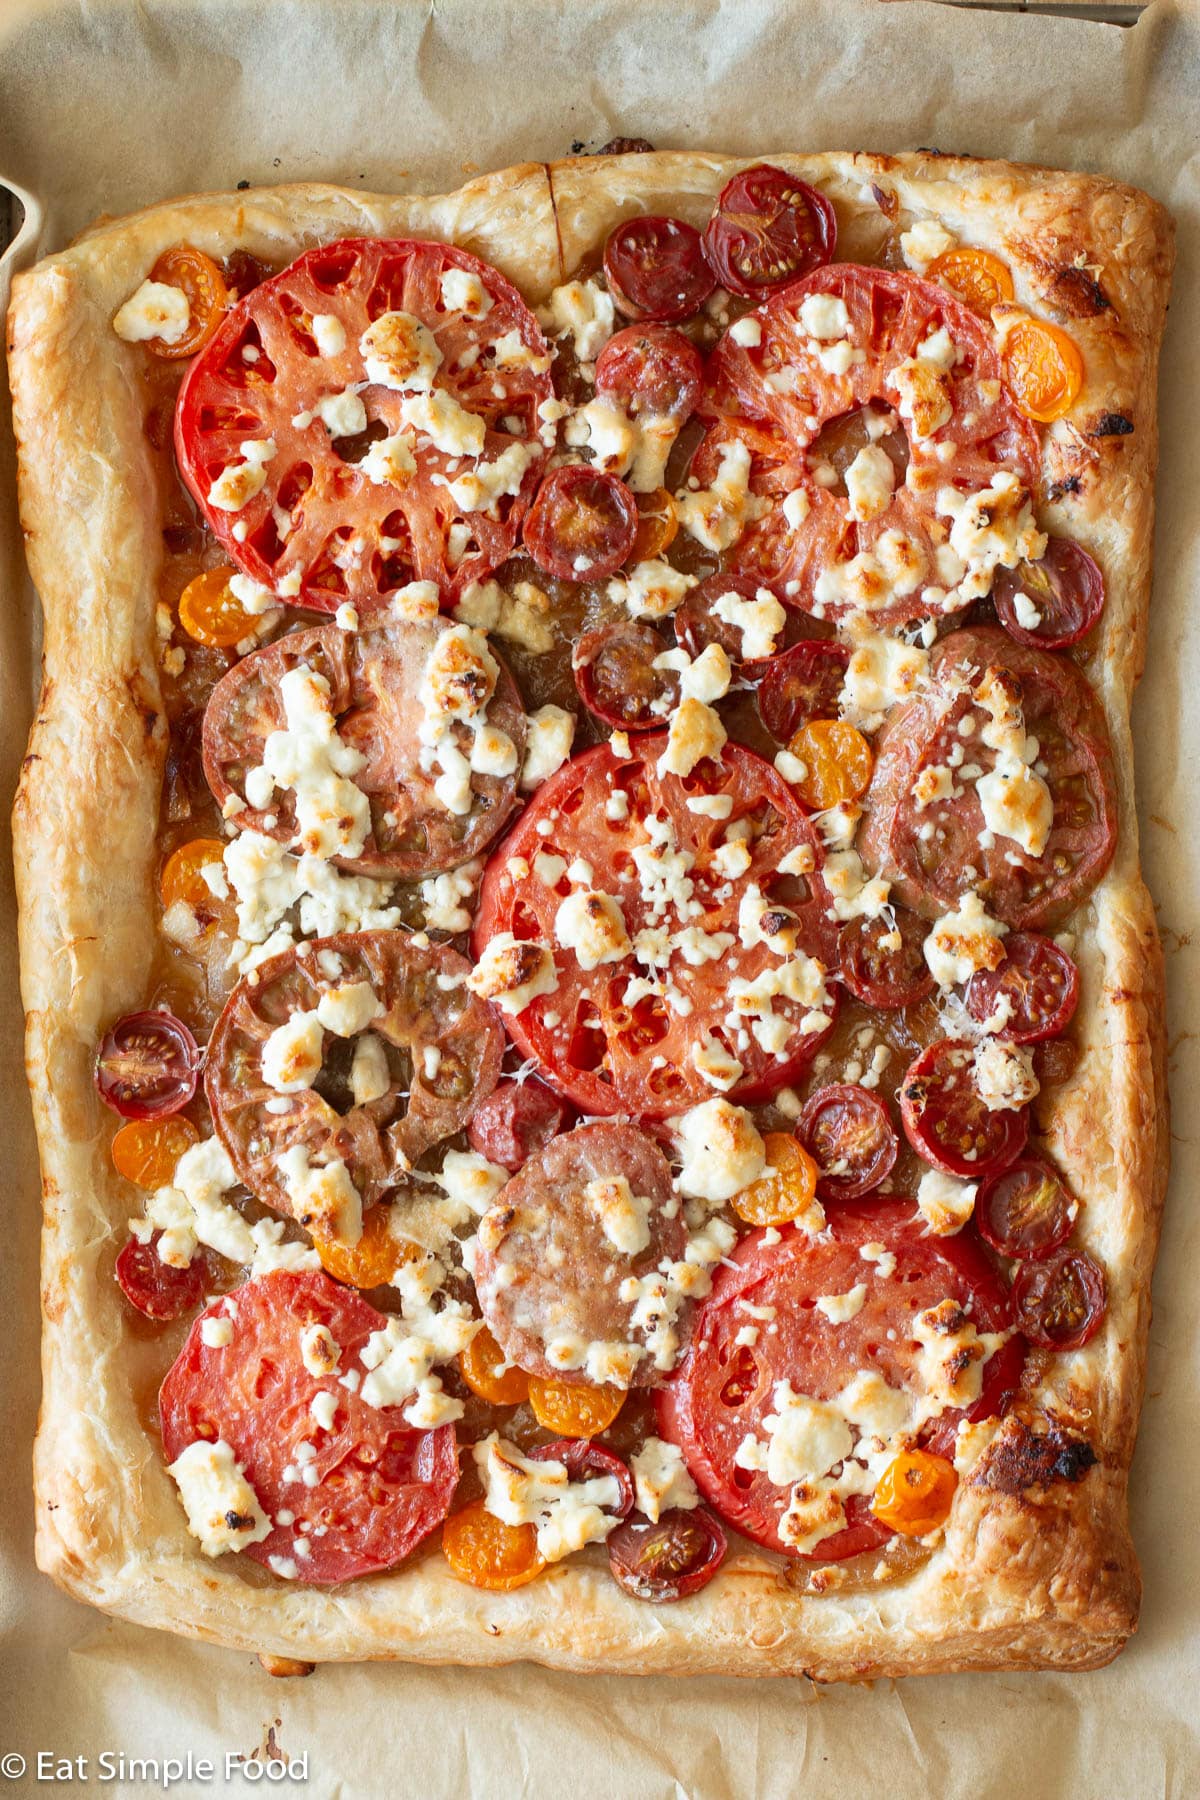 Cooked rectangle puff pastry laid on top of parchment paper. Cooked and browned ingredients on top of puff pastry layered: caramelized onions, cherry tomatoes, red and purple tomatoes, Parmesan cheese and goat cheese.